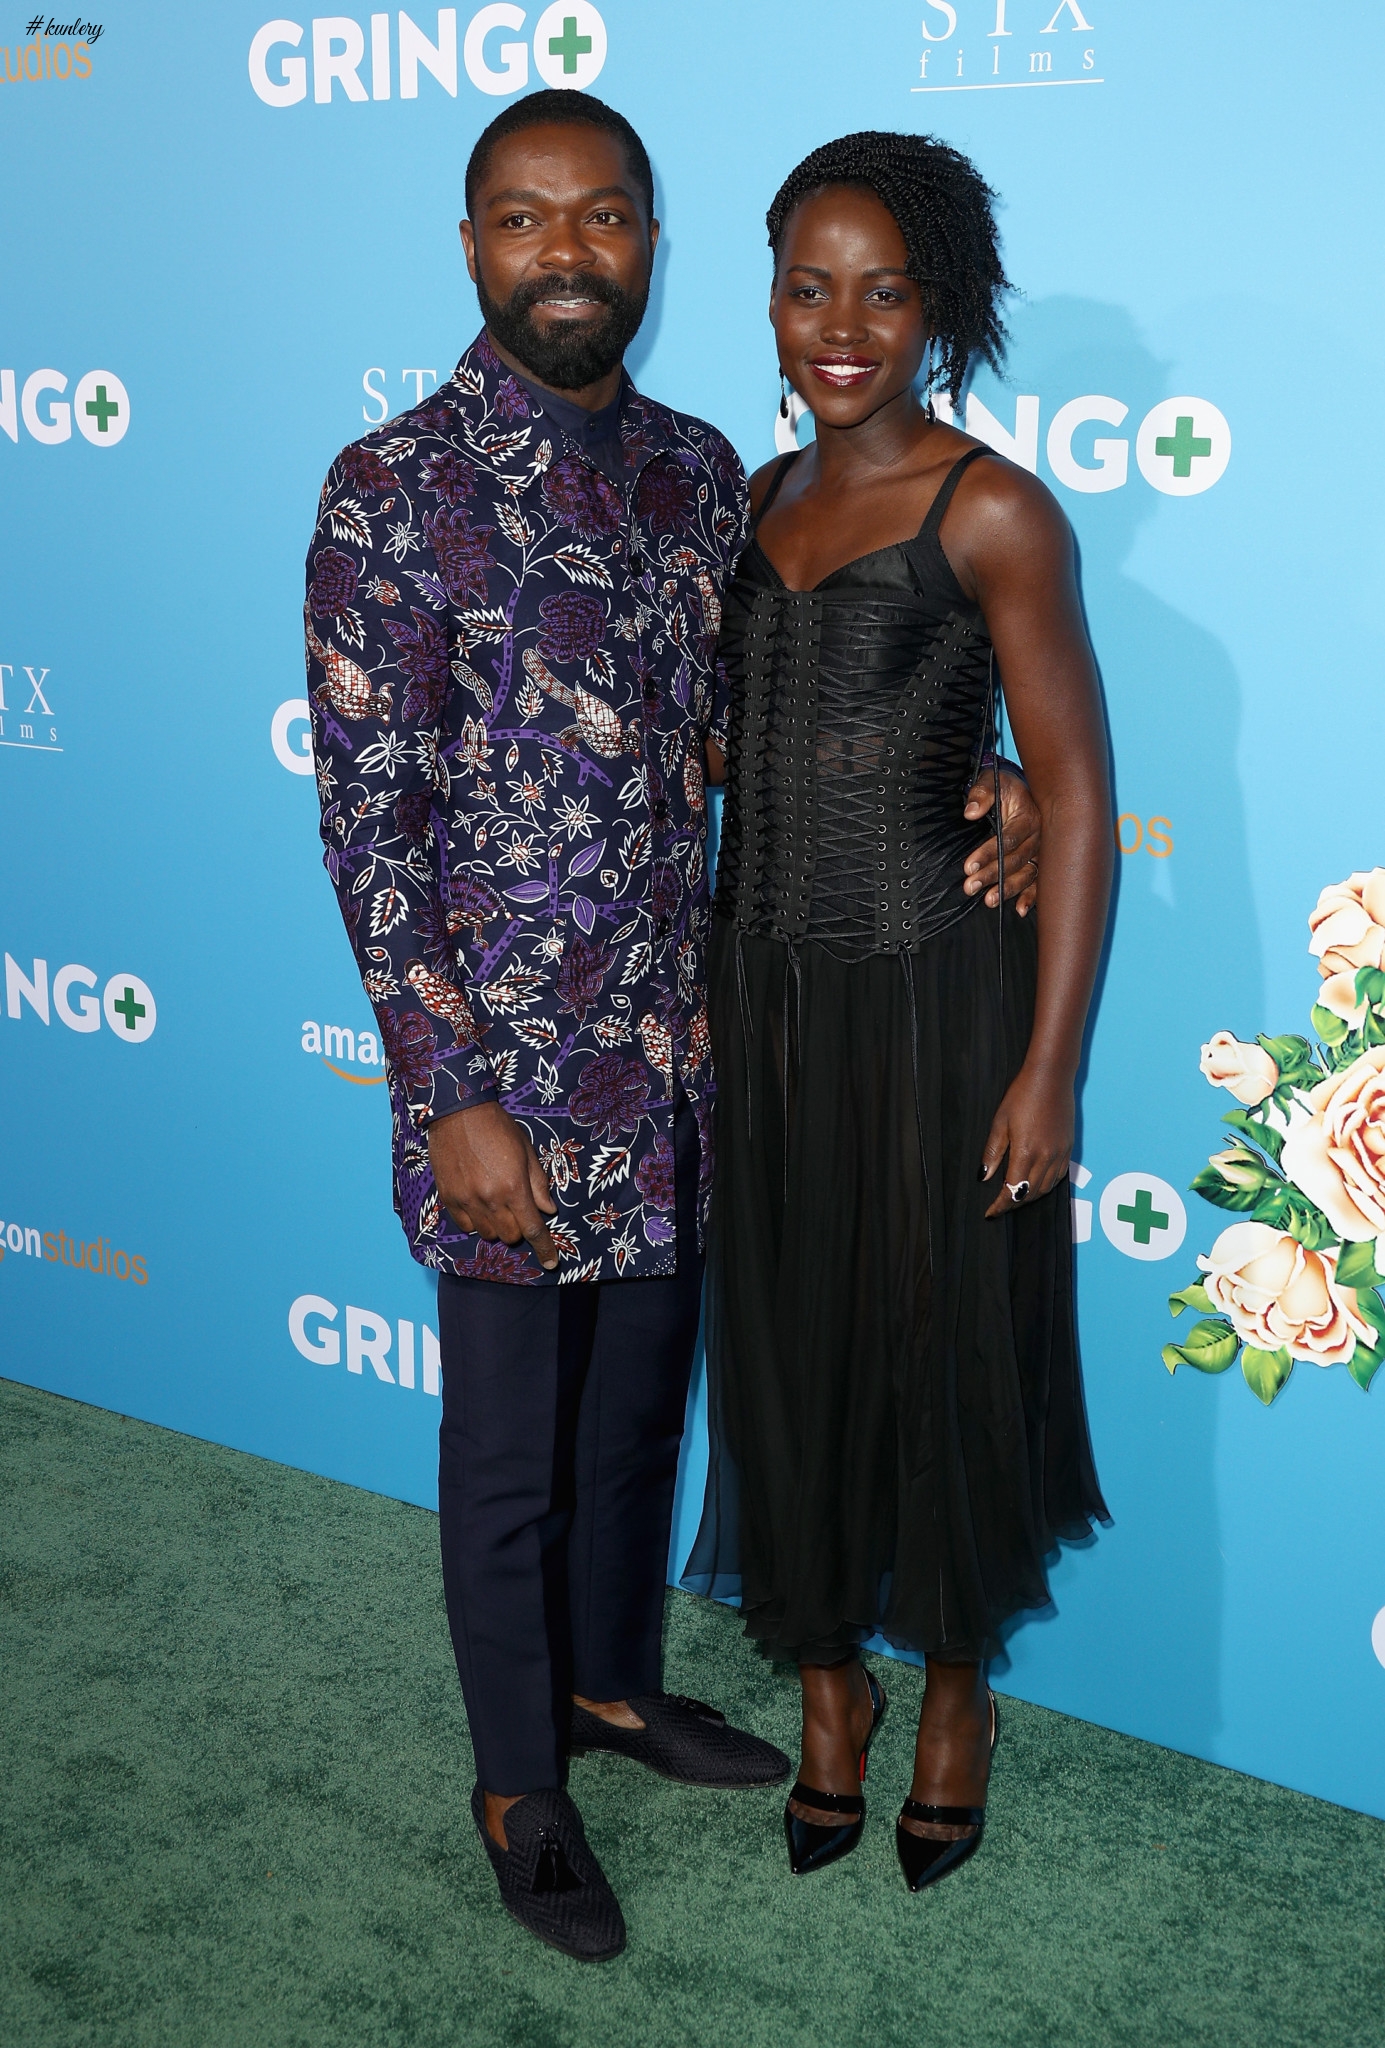 On Tuesday night, Hollywood film Gringo had its world premiere at the Regal LA Live Stadium 14 in Los Angeles.  The premiere had the cast of film David Oyelowo, Charlize Theron, Amanda Seyfried along with celebrities such as 